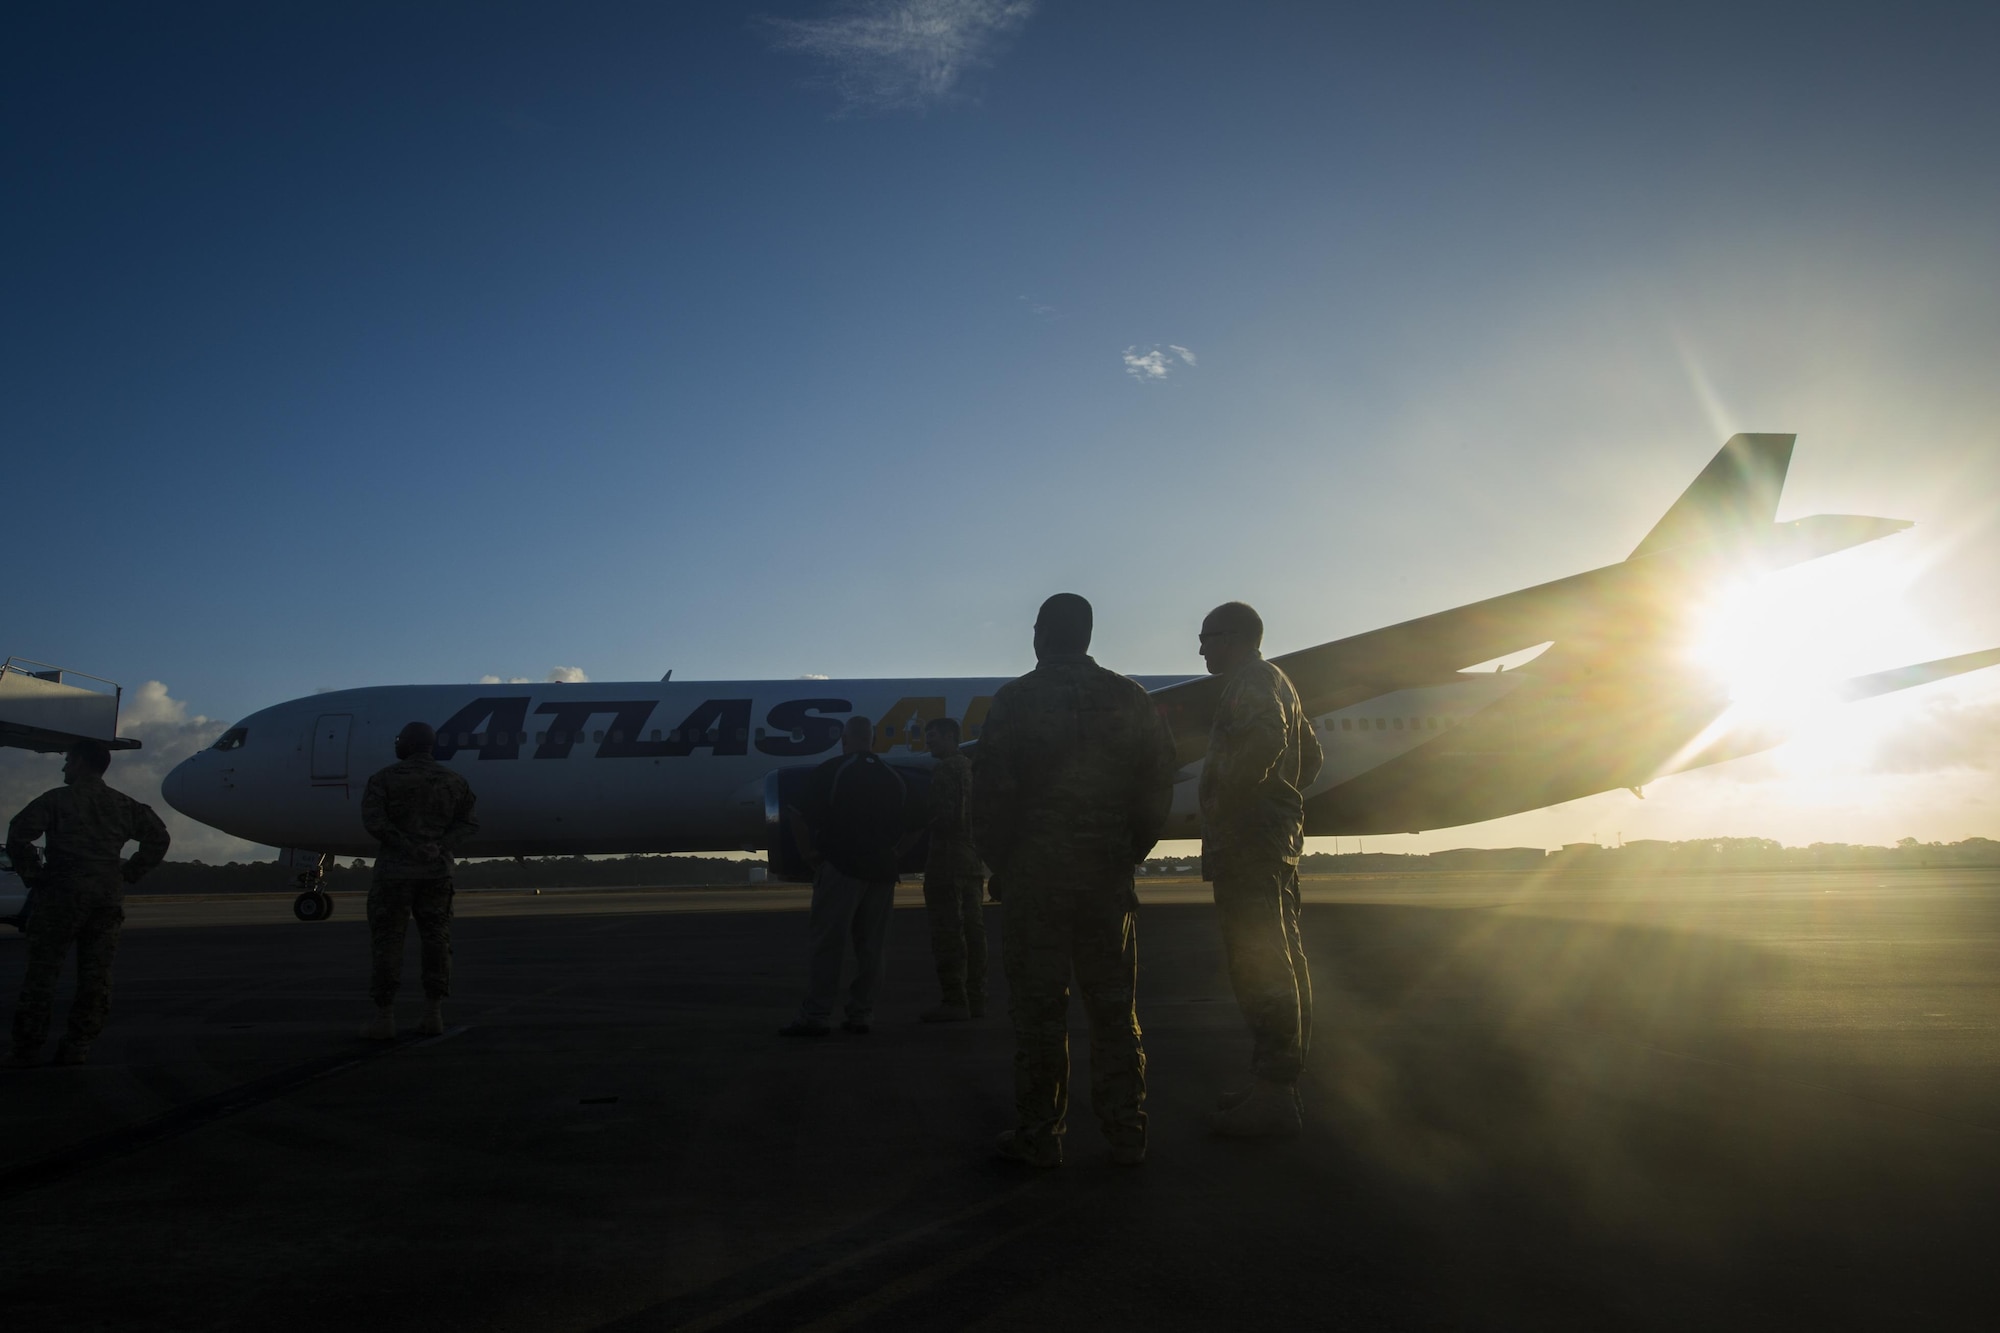 Team Hurlburt leadership and Airmen wait for the arrival of Air Commandos at Hurlburt Field, Fla., Dec. 13, 2016. More than 125 Air Commandos were greeted as they returned from deployment by family and friends. (U.S. Air Force photo by Airman 1st Class Joseph Pick)